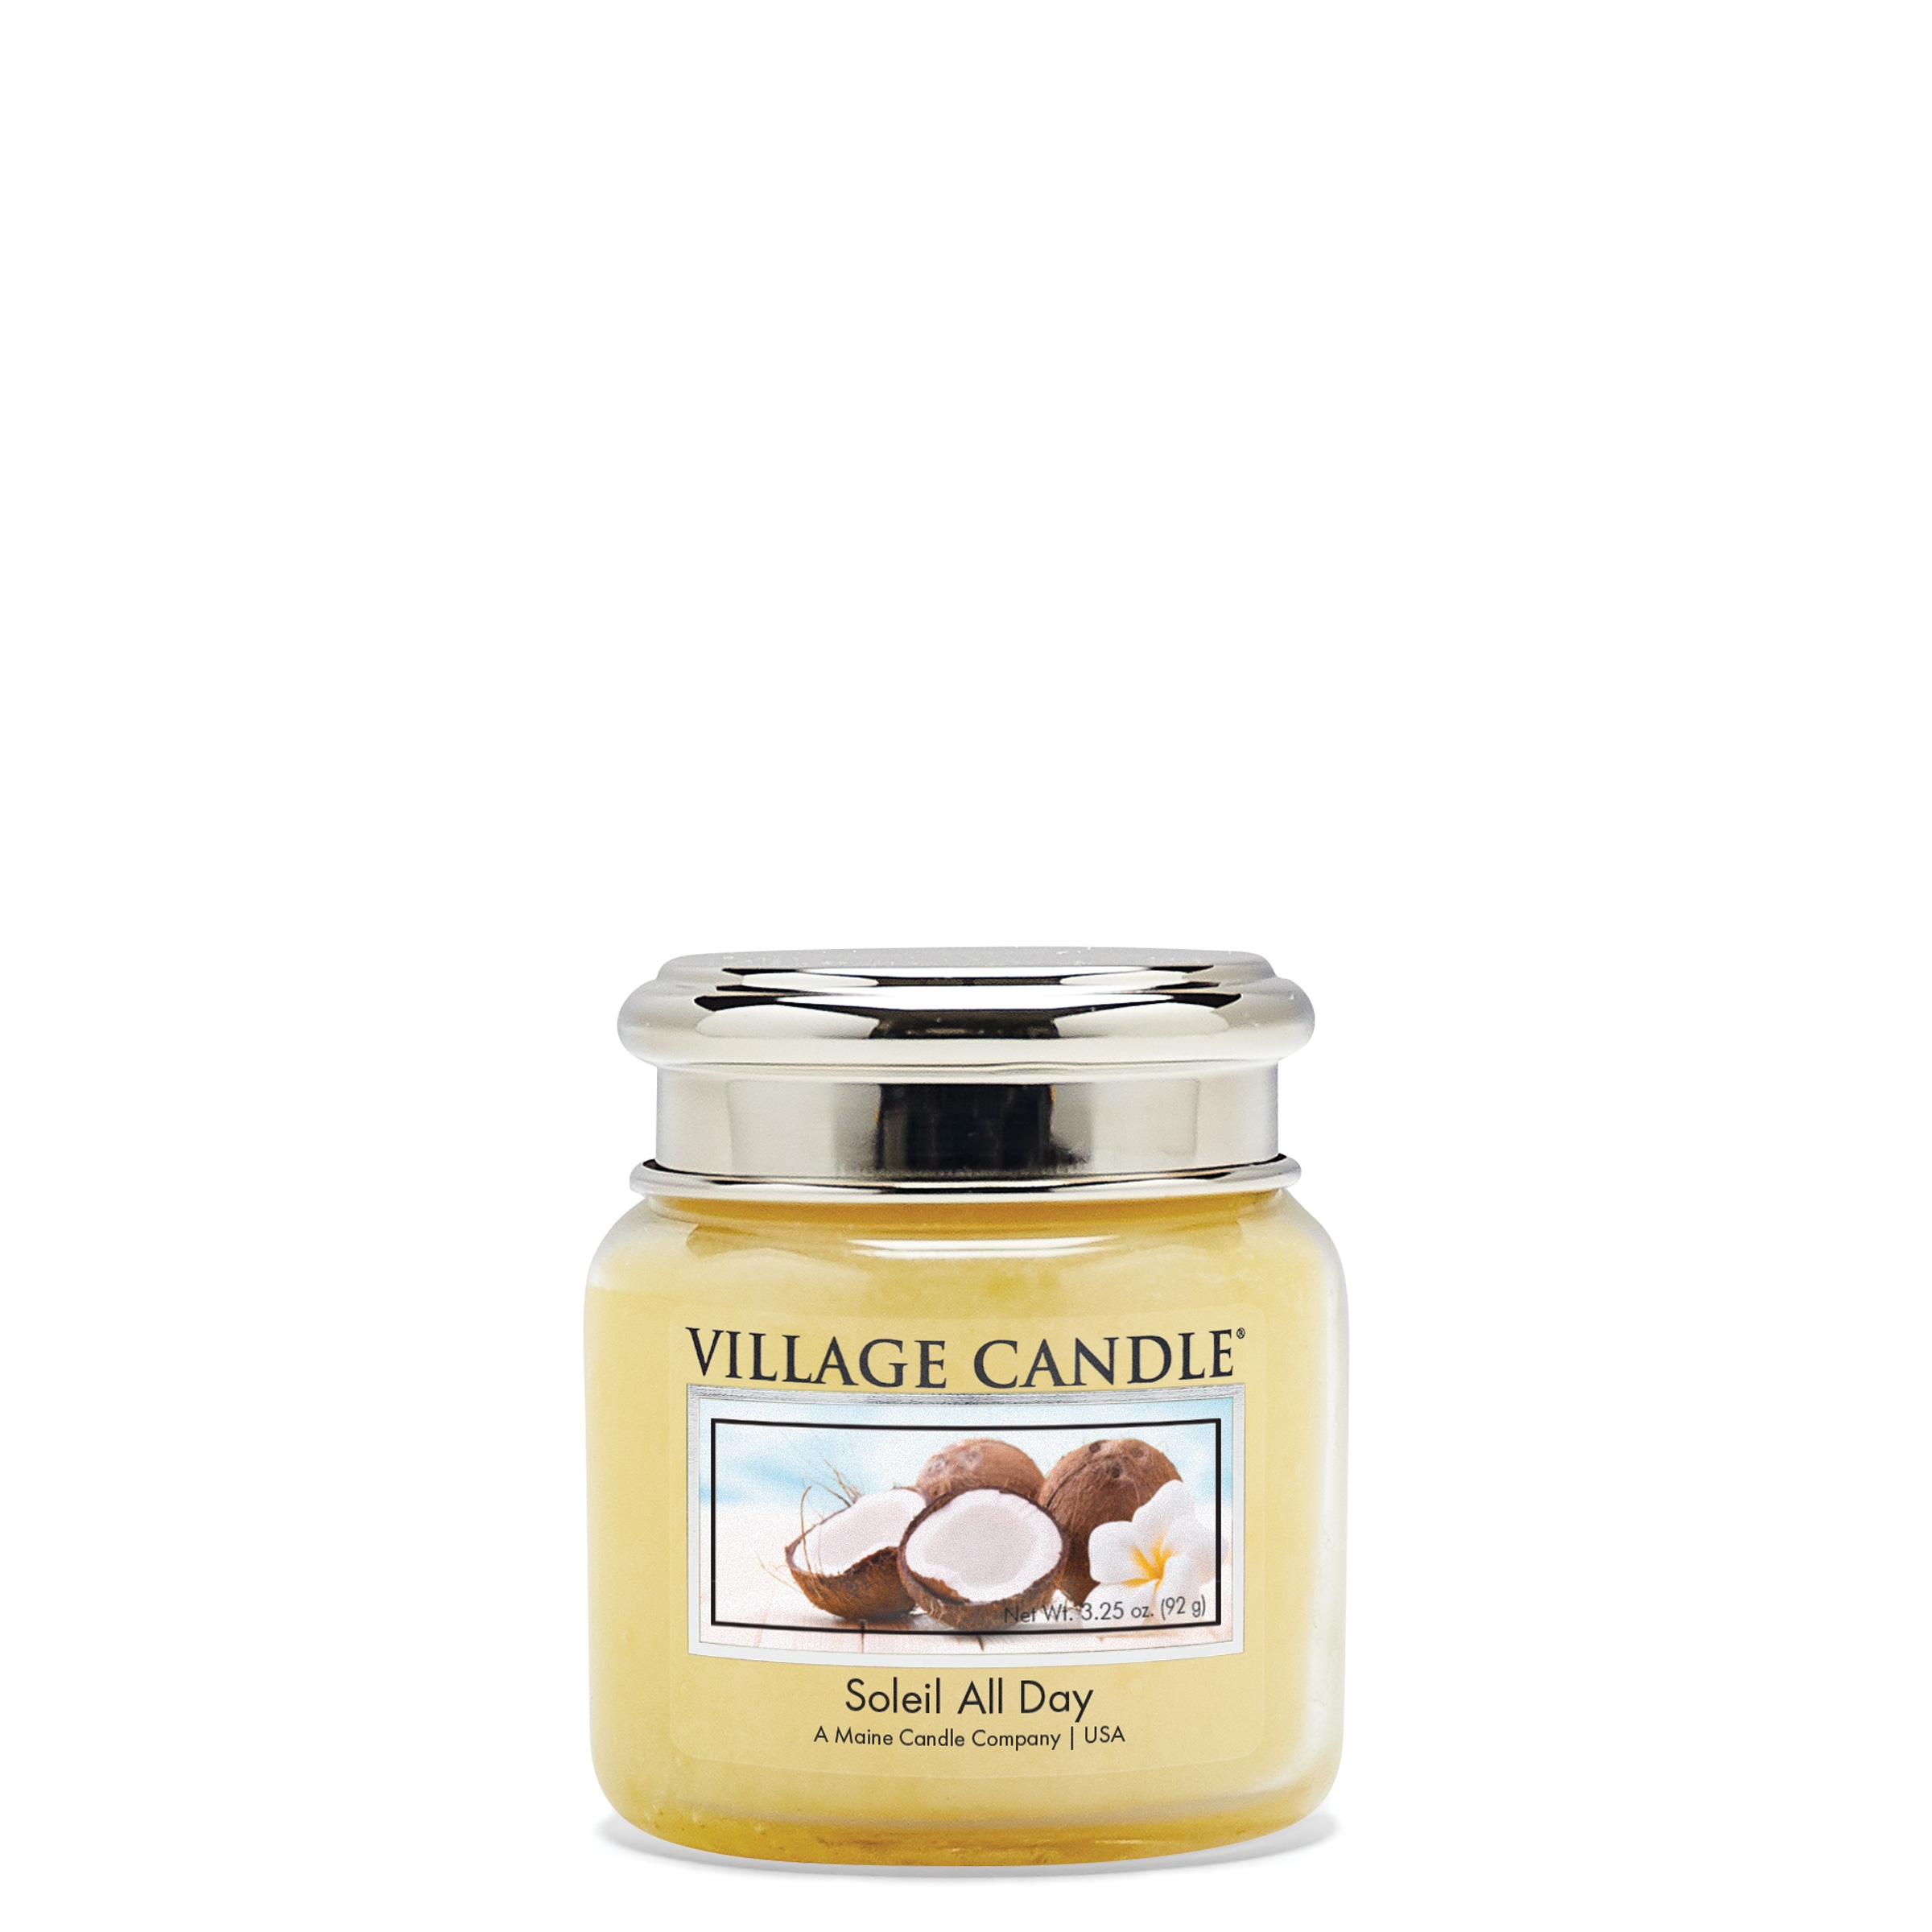 Soleil All Day 185g Glas Village Candle